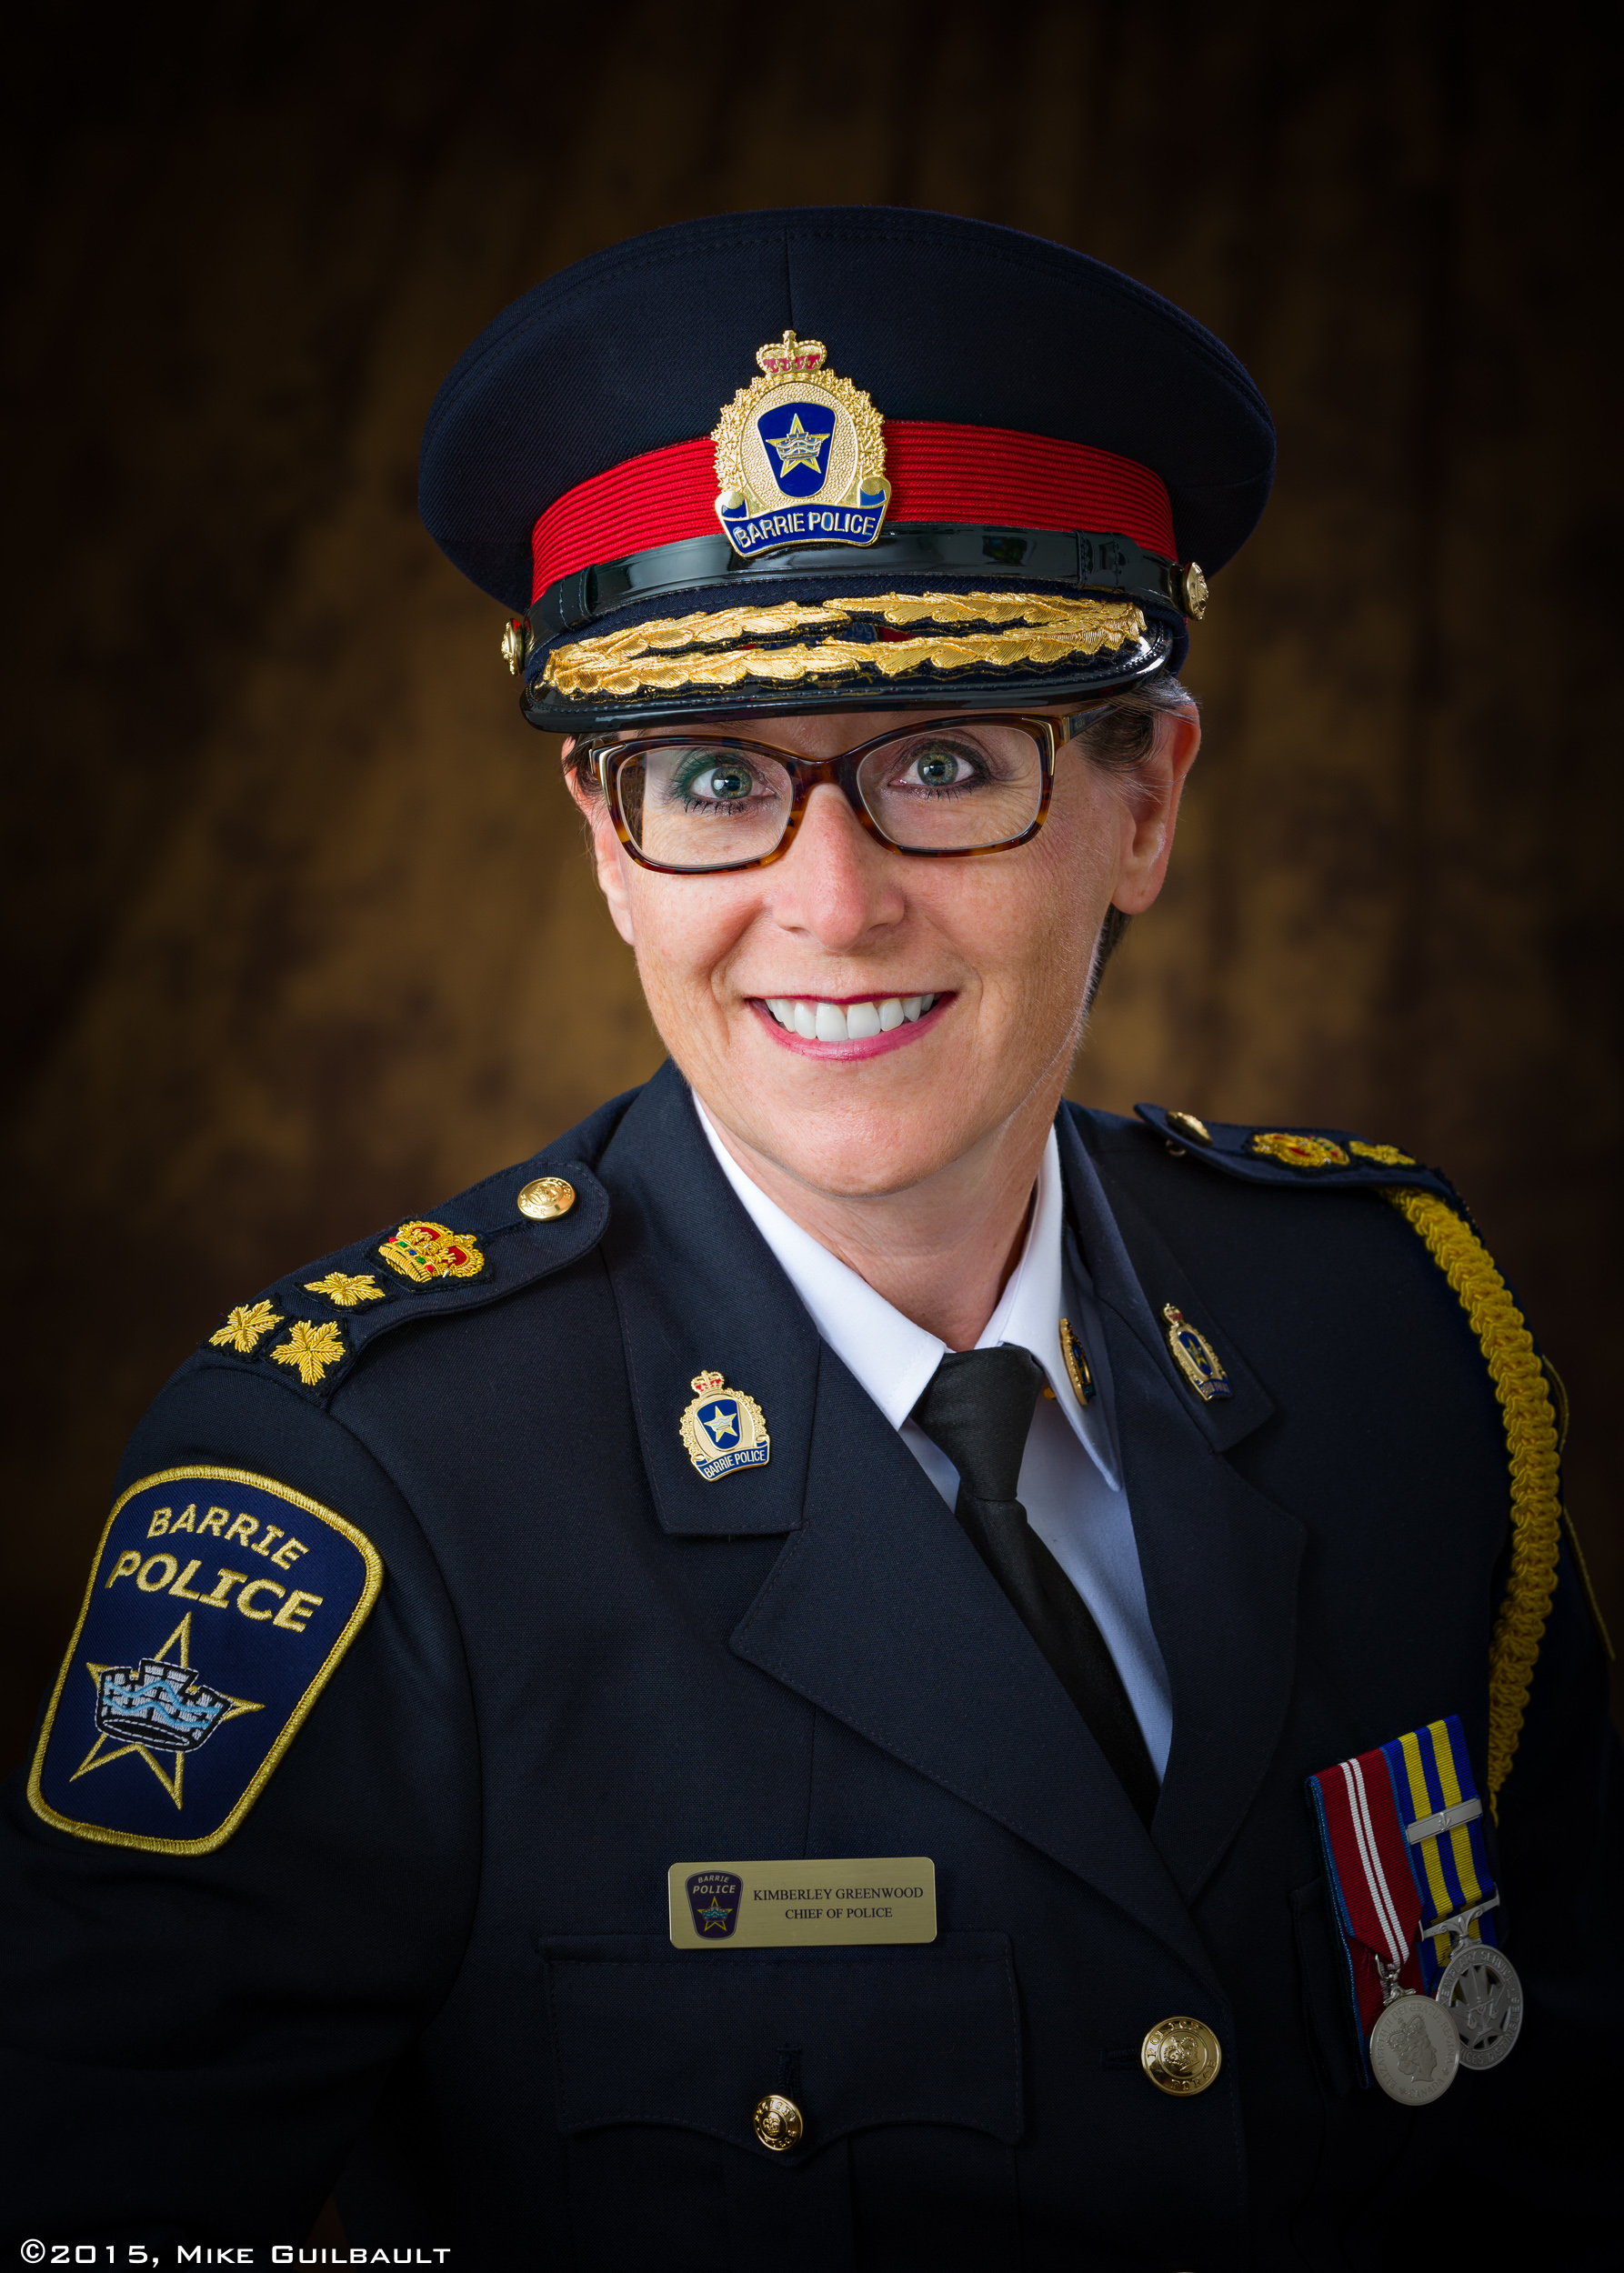 Portrait of Barrie Police Chief 